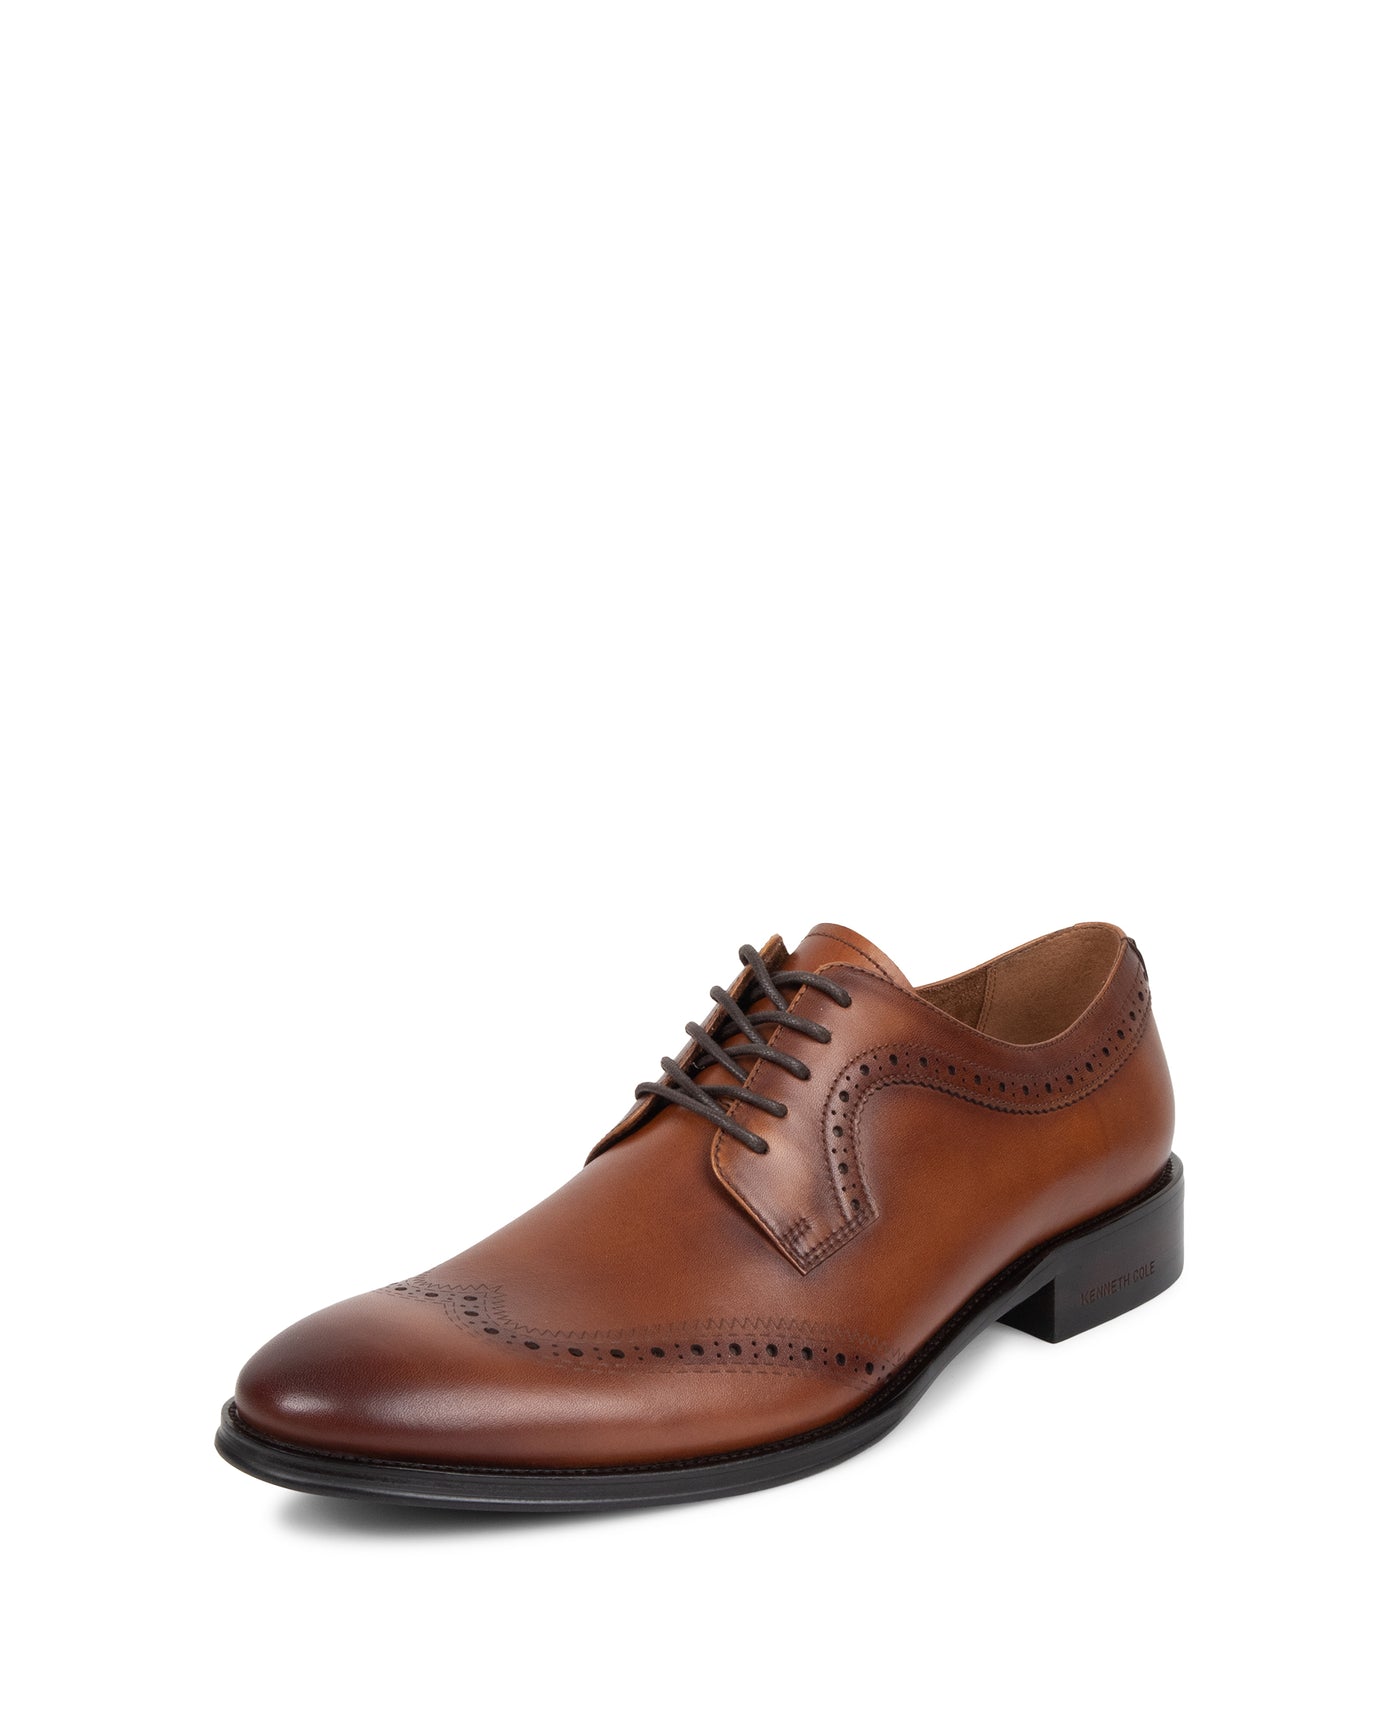 Kenneth Cole New York Men's Tully Lace Up Dress Shoes